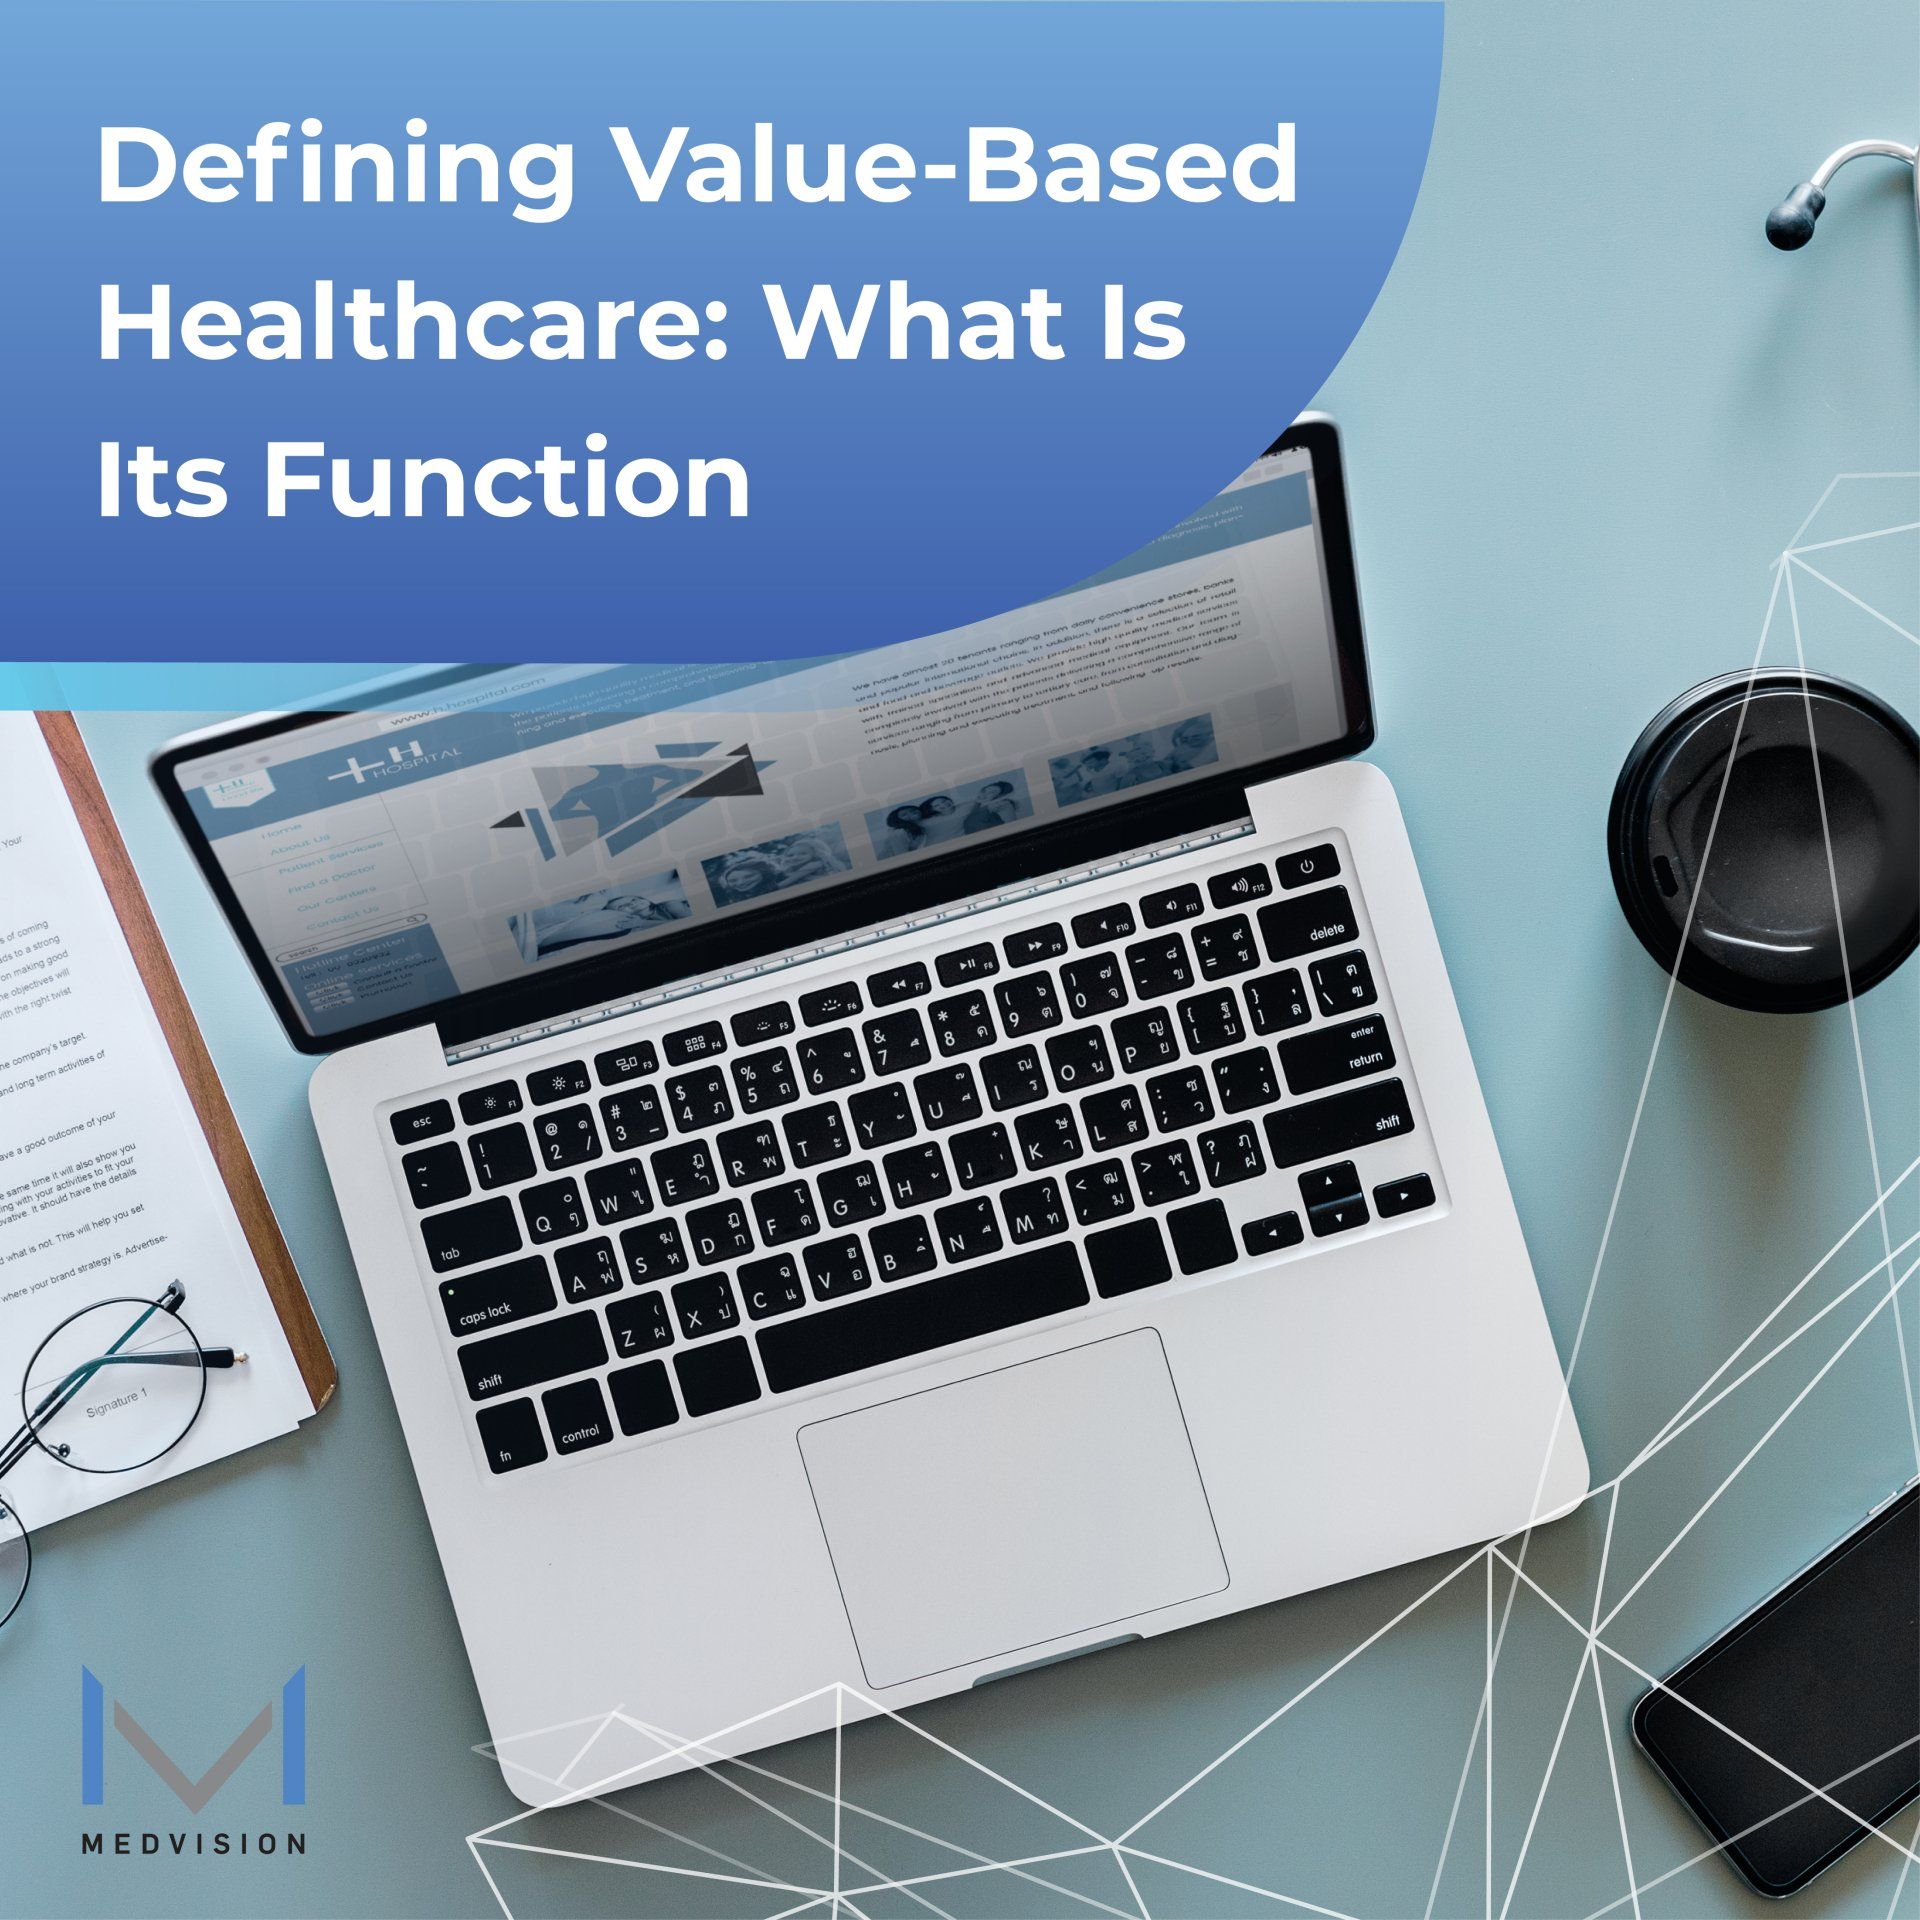 Defining Value-Based Healthcare: What Is Its Function